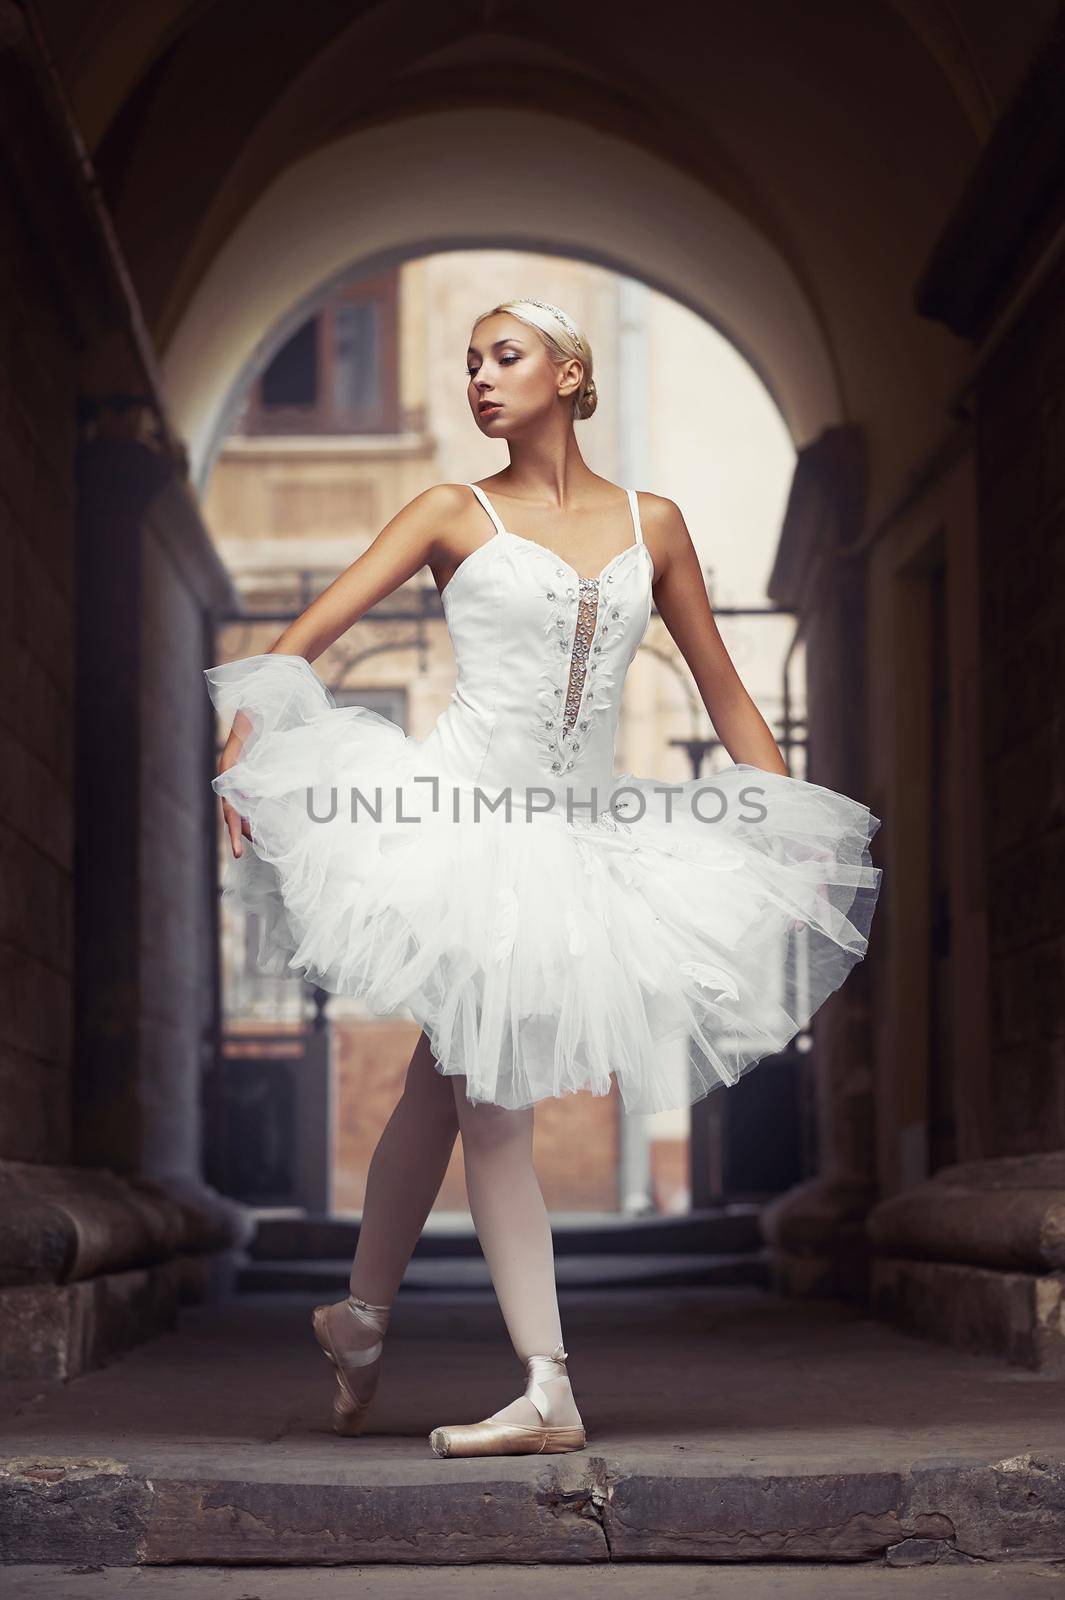 Ballet beauty. Soft focus shot of a gorgeous woman ballet dancer standing in an old archway